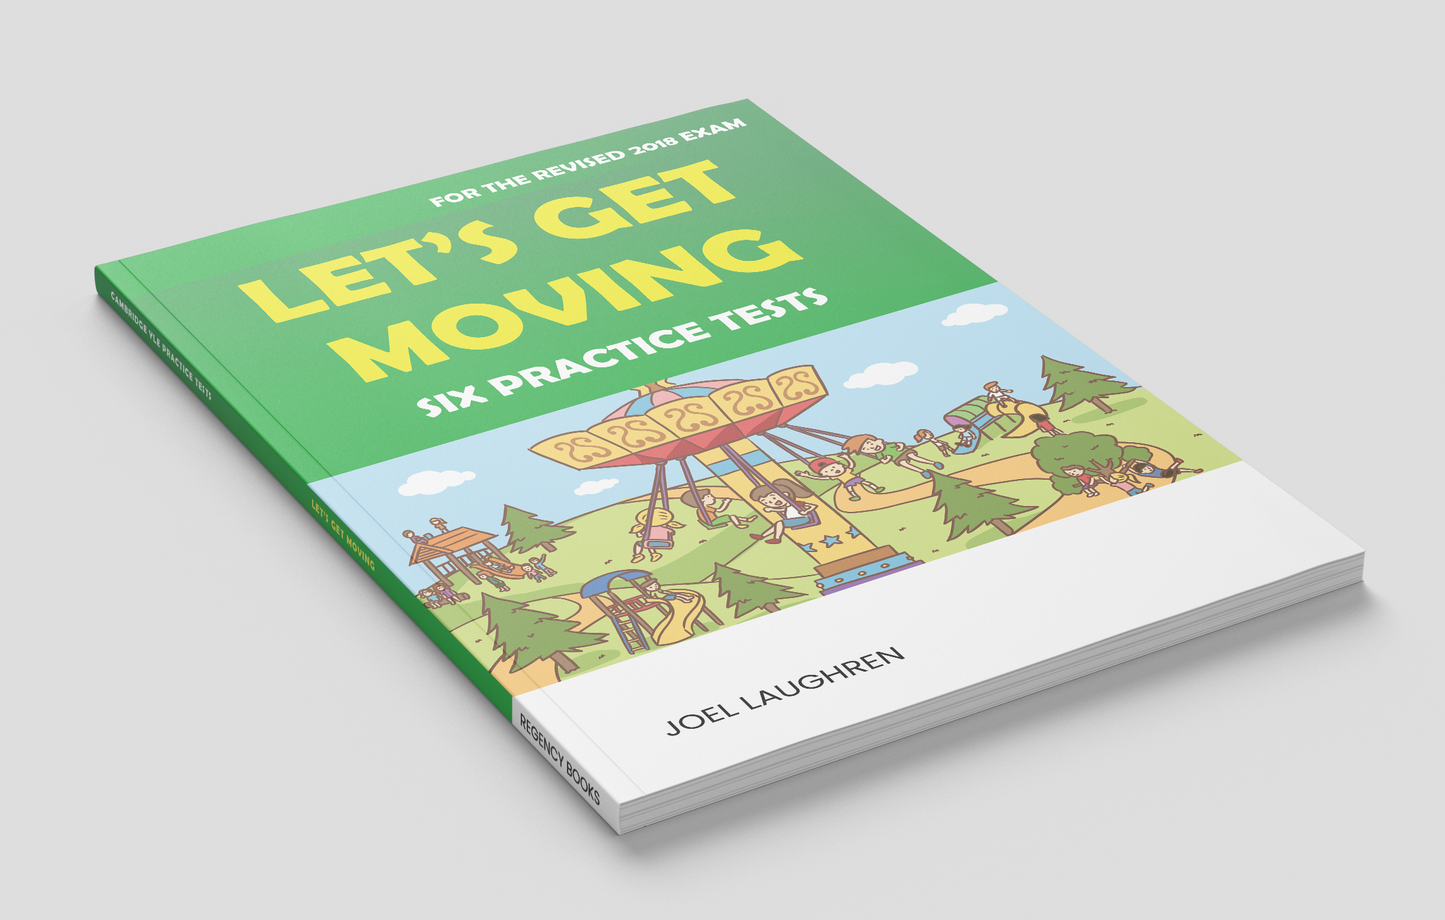 Let's Get Moving - Six Practice Tests